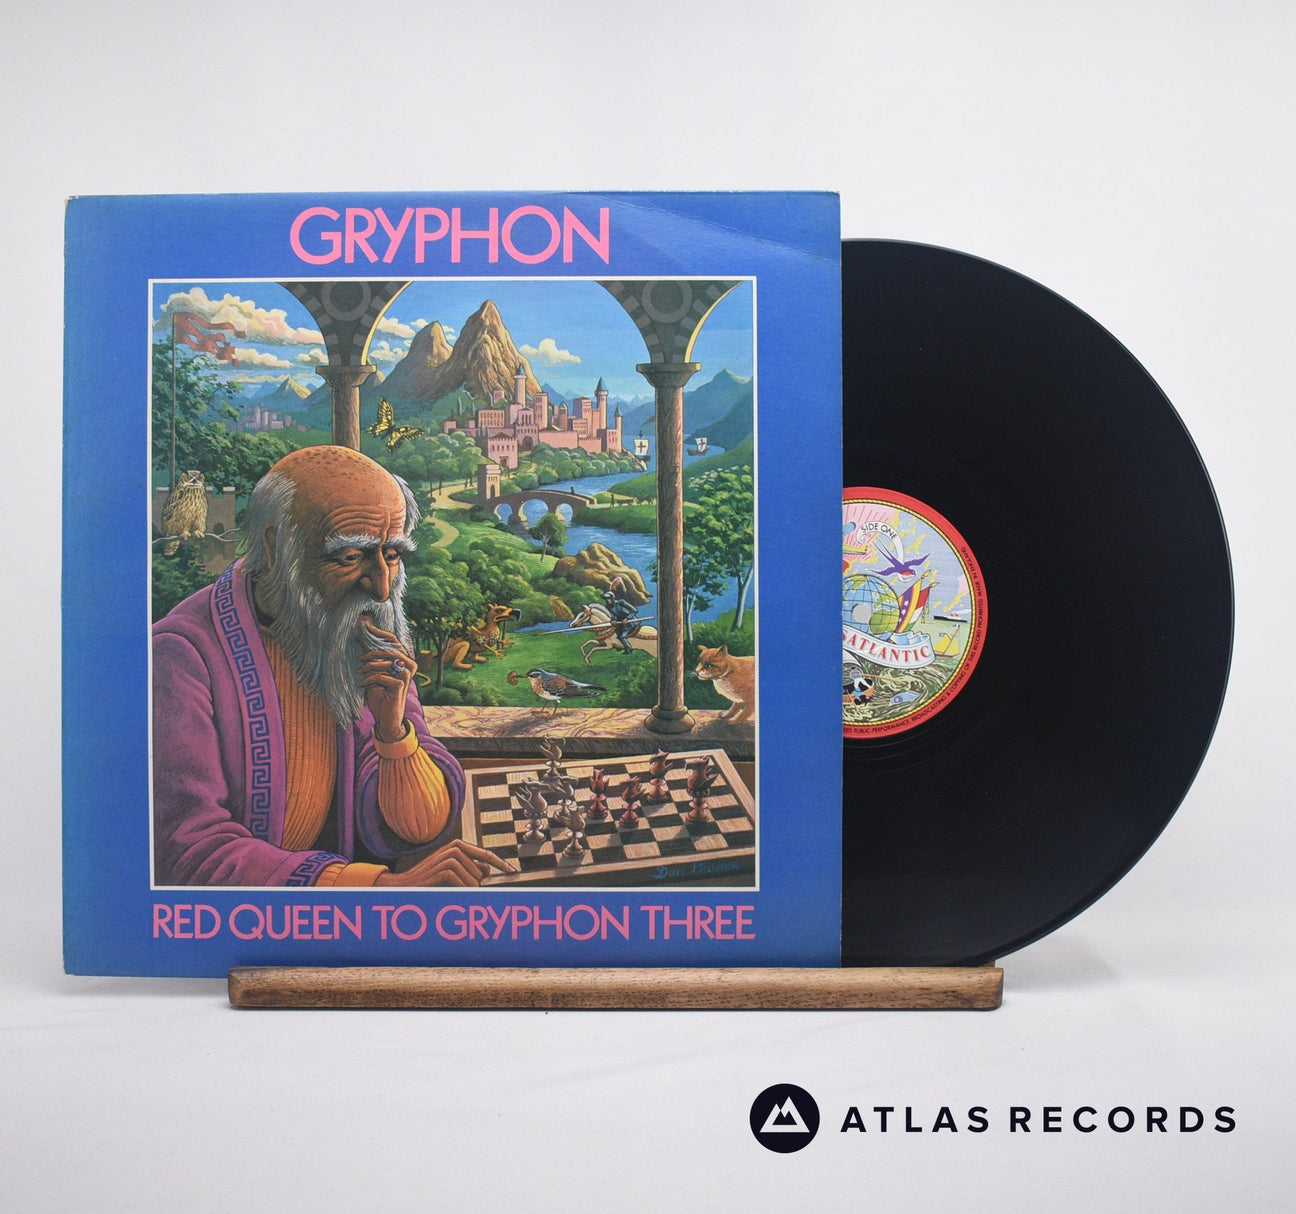 Gryphon Red Queen To Gryphon Three LP Vinyl Record - Front Cover & Record